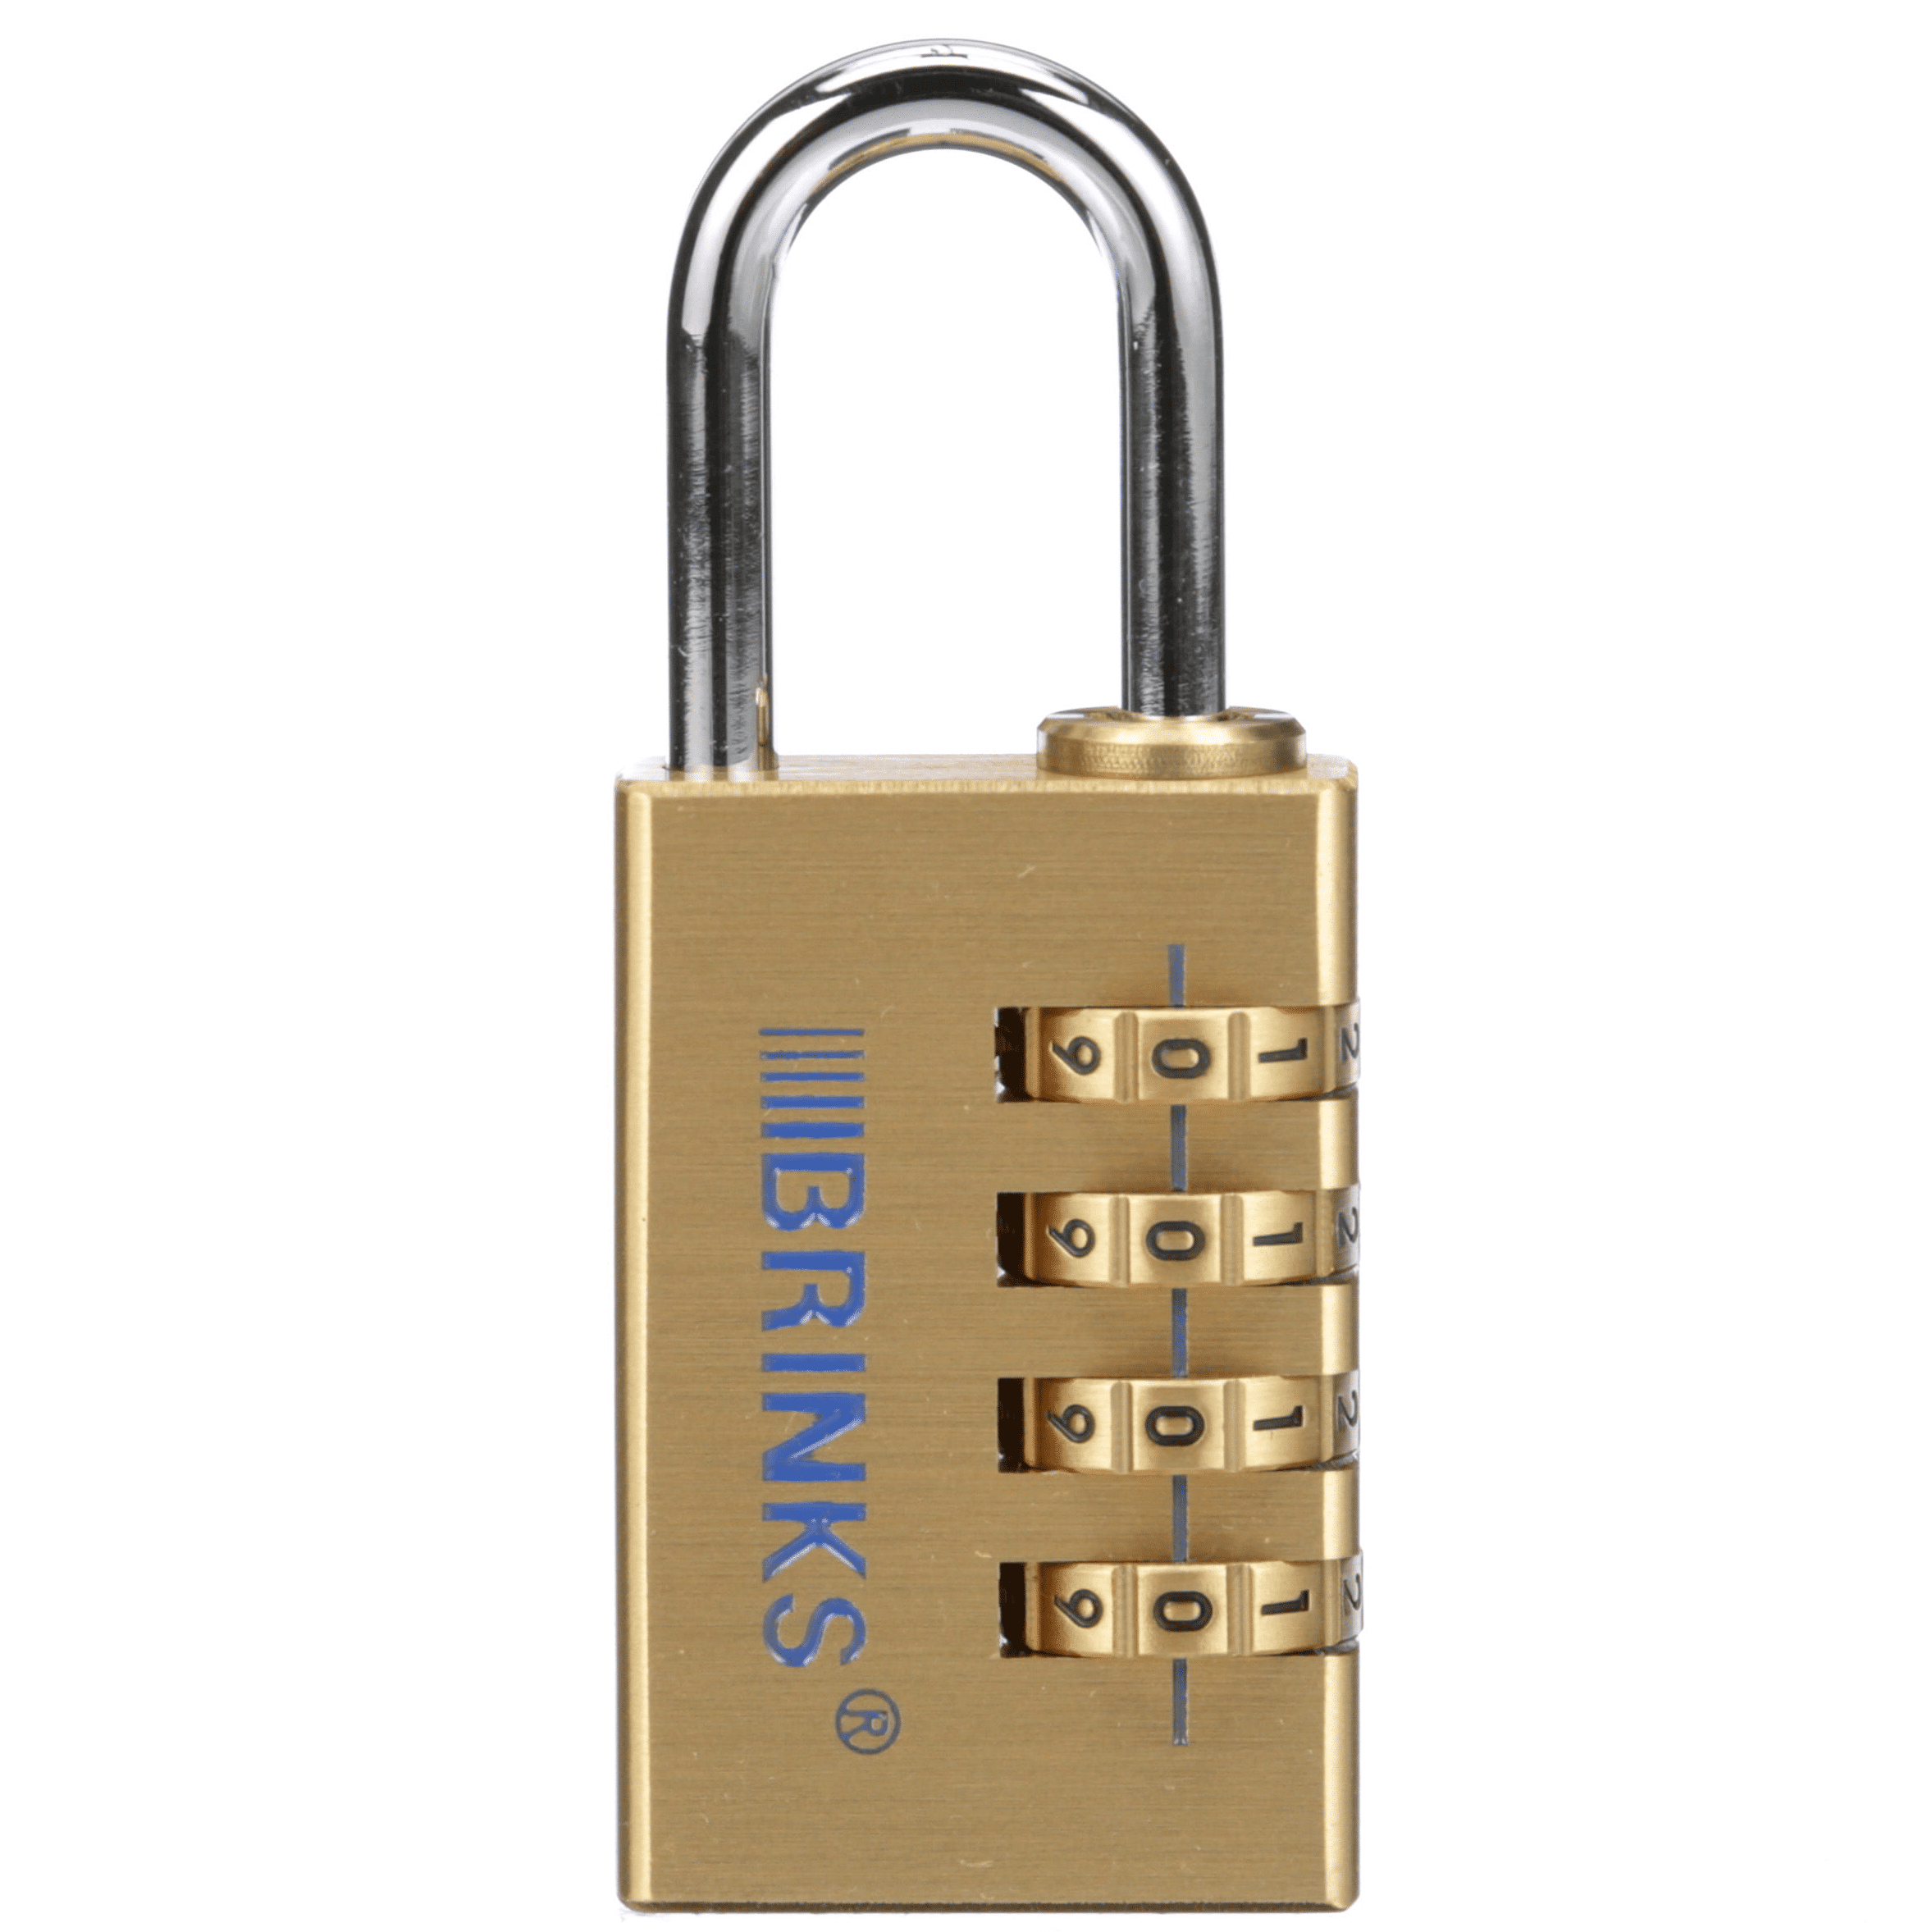 Brinks 4-Dial Solid Brass Resettable Combination Padlock, 30mm Body with 1 inch Shackle